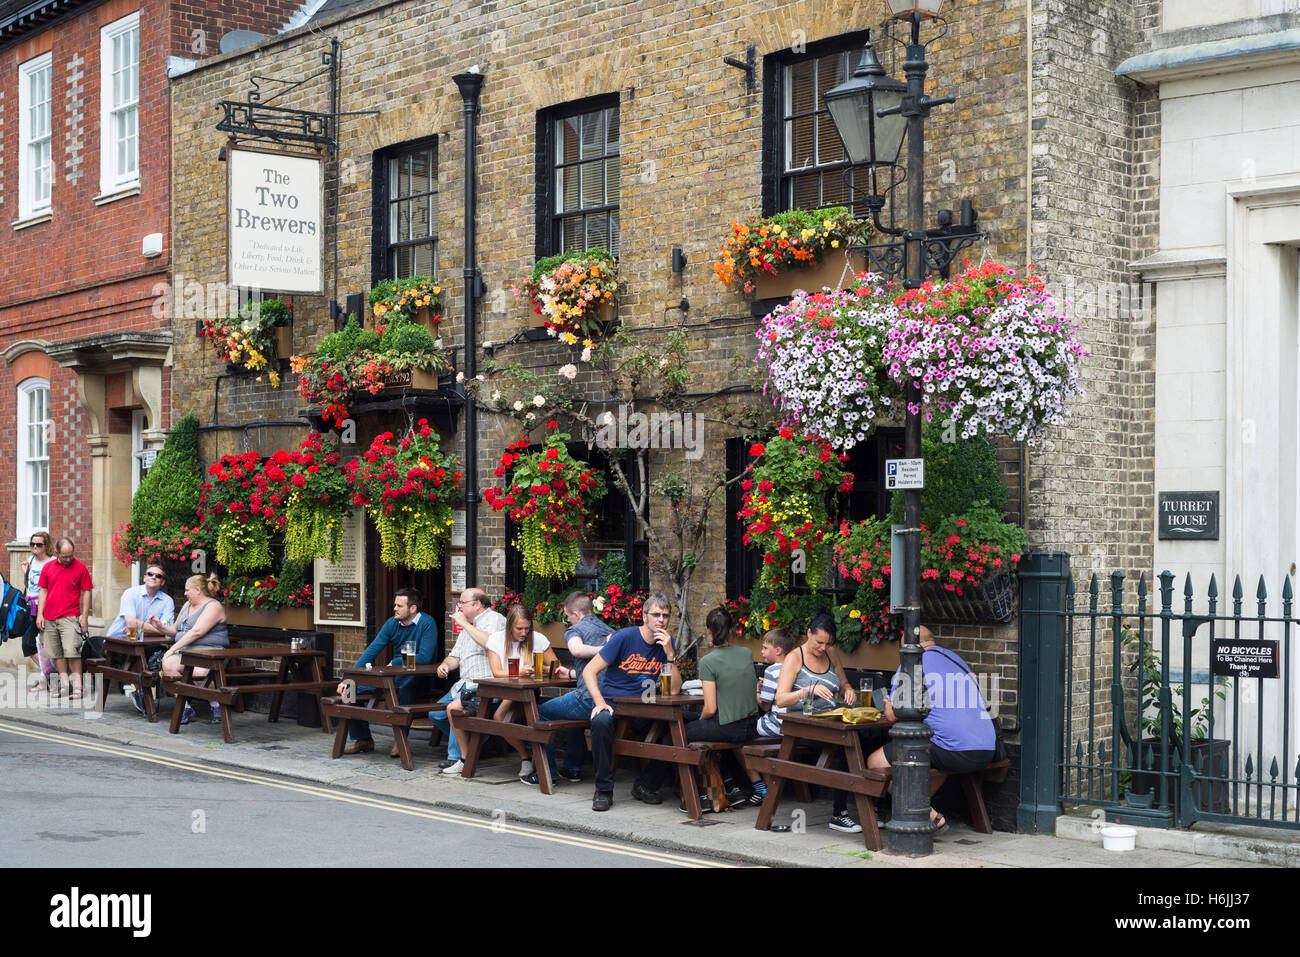 People sitting and drinking outside the premises of The Two Brewers pub decorated with blossoming flowers near Windsor castle on a summer day, UK Stock Photo